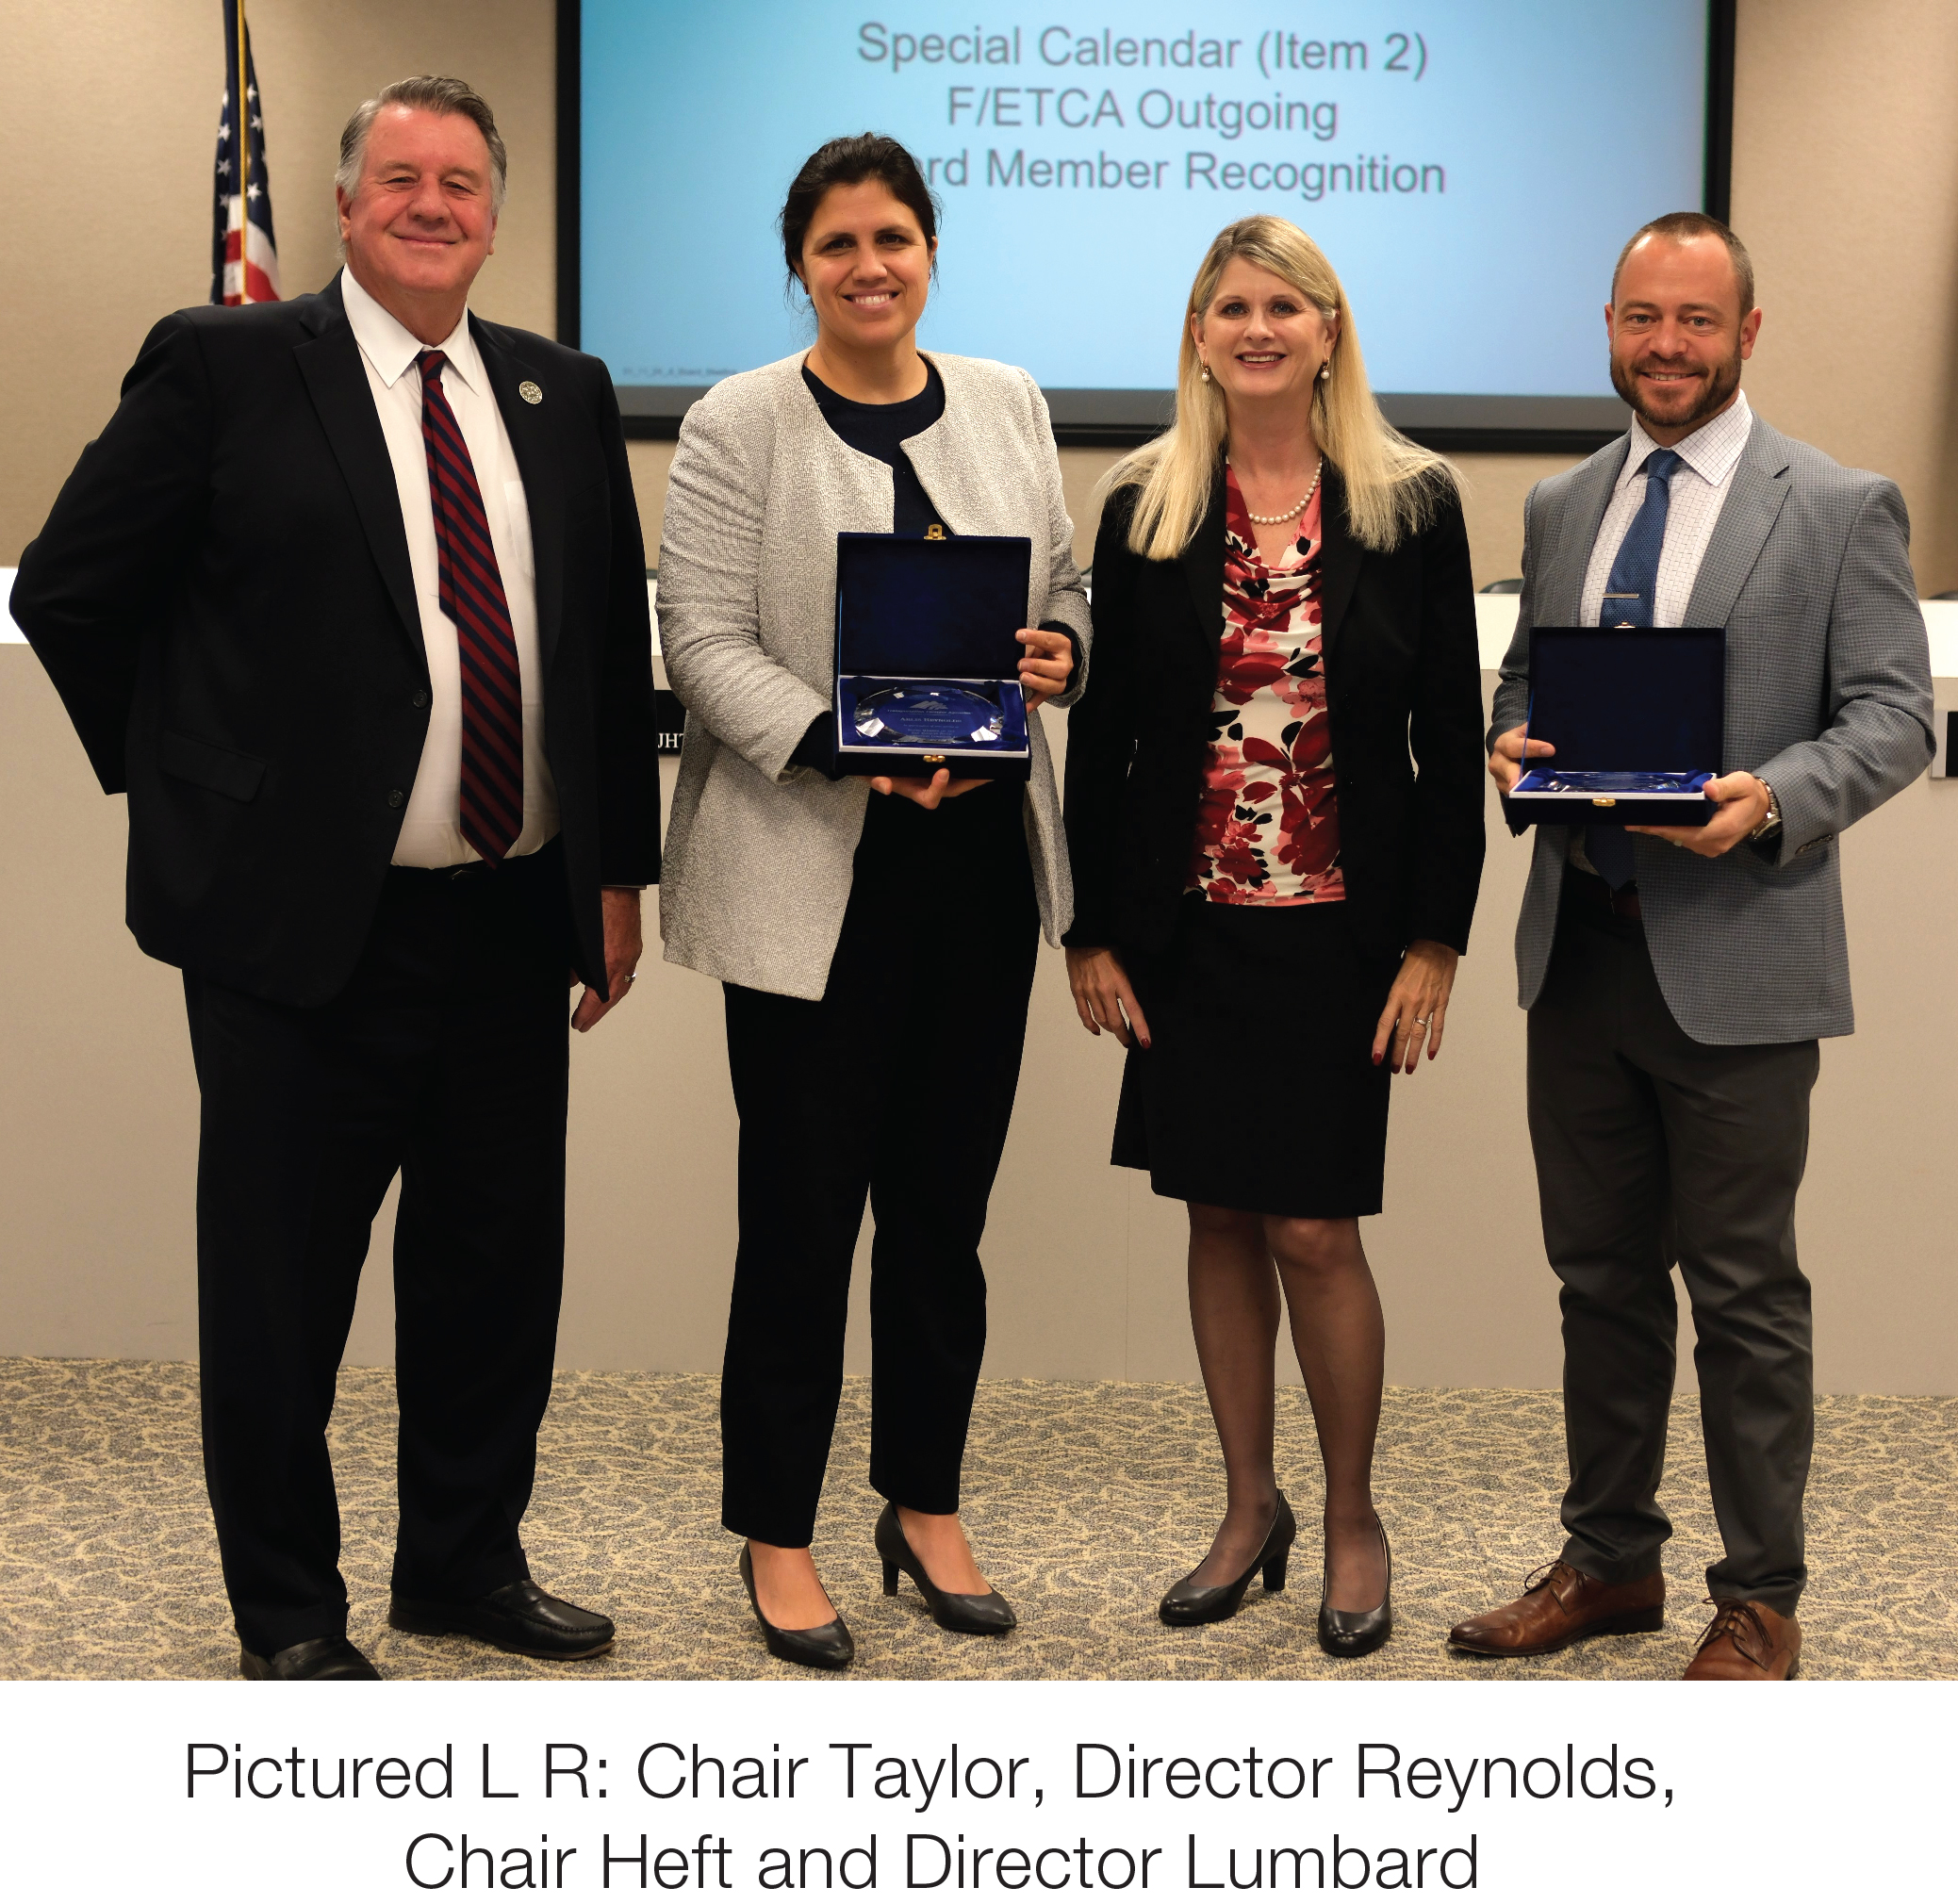 Outgoing Board Member Recognition